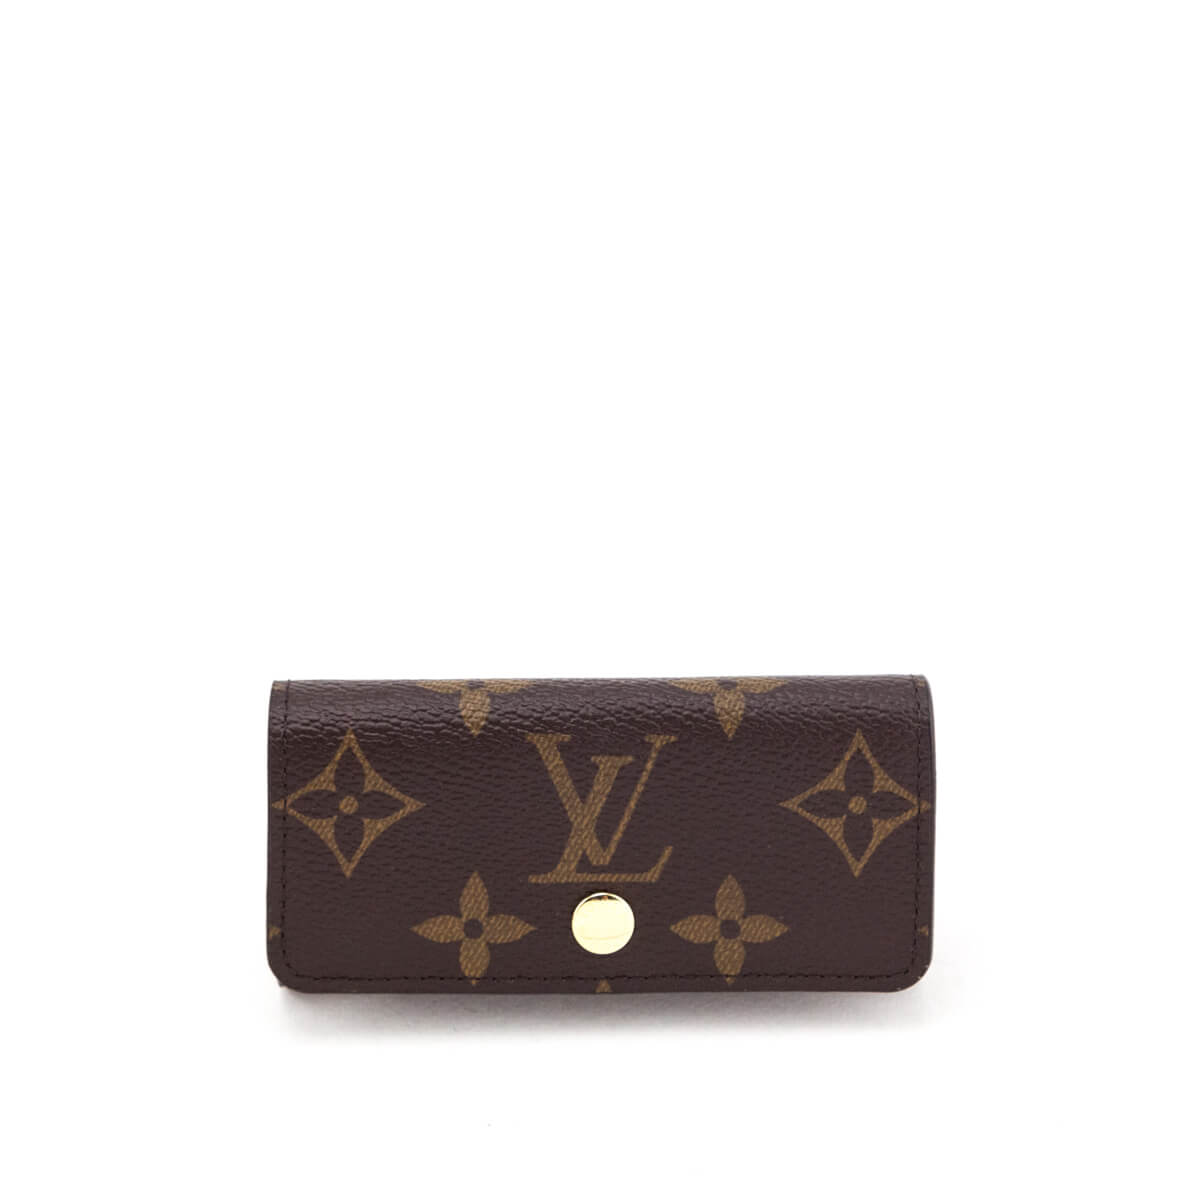 Louis Vuitton 2007 pre-owned 4 Key holder